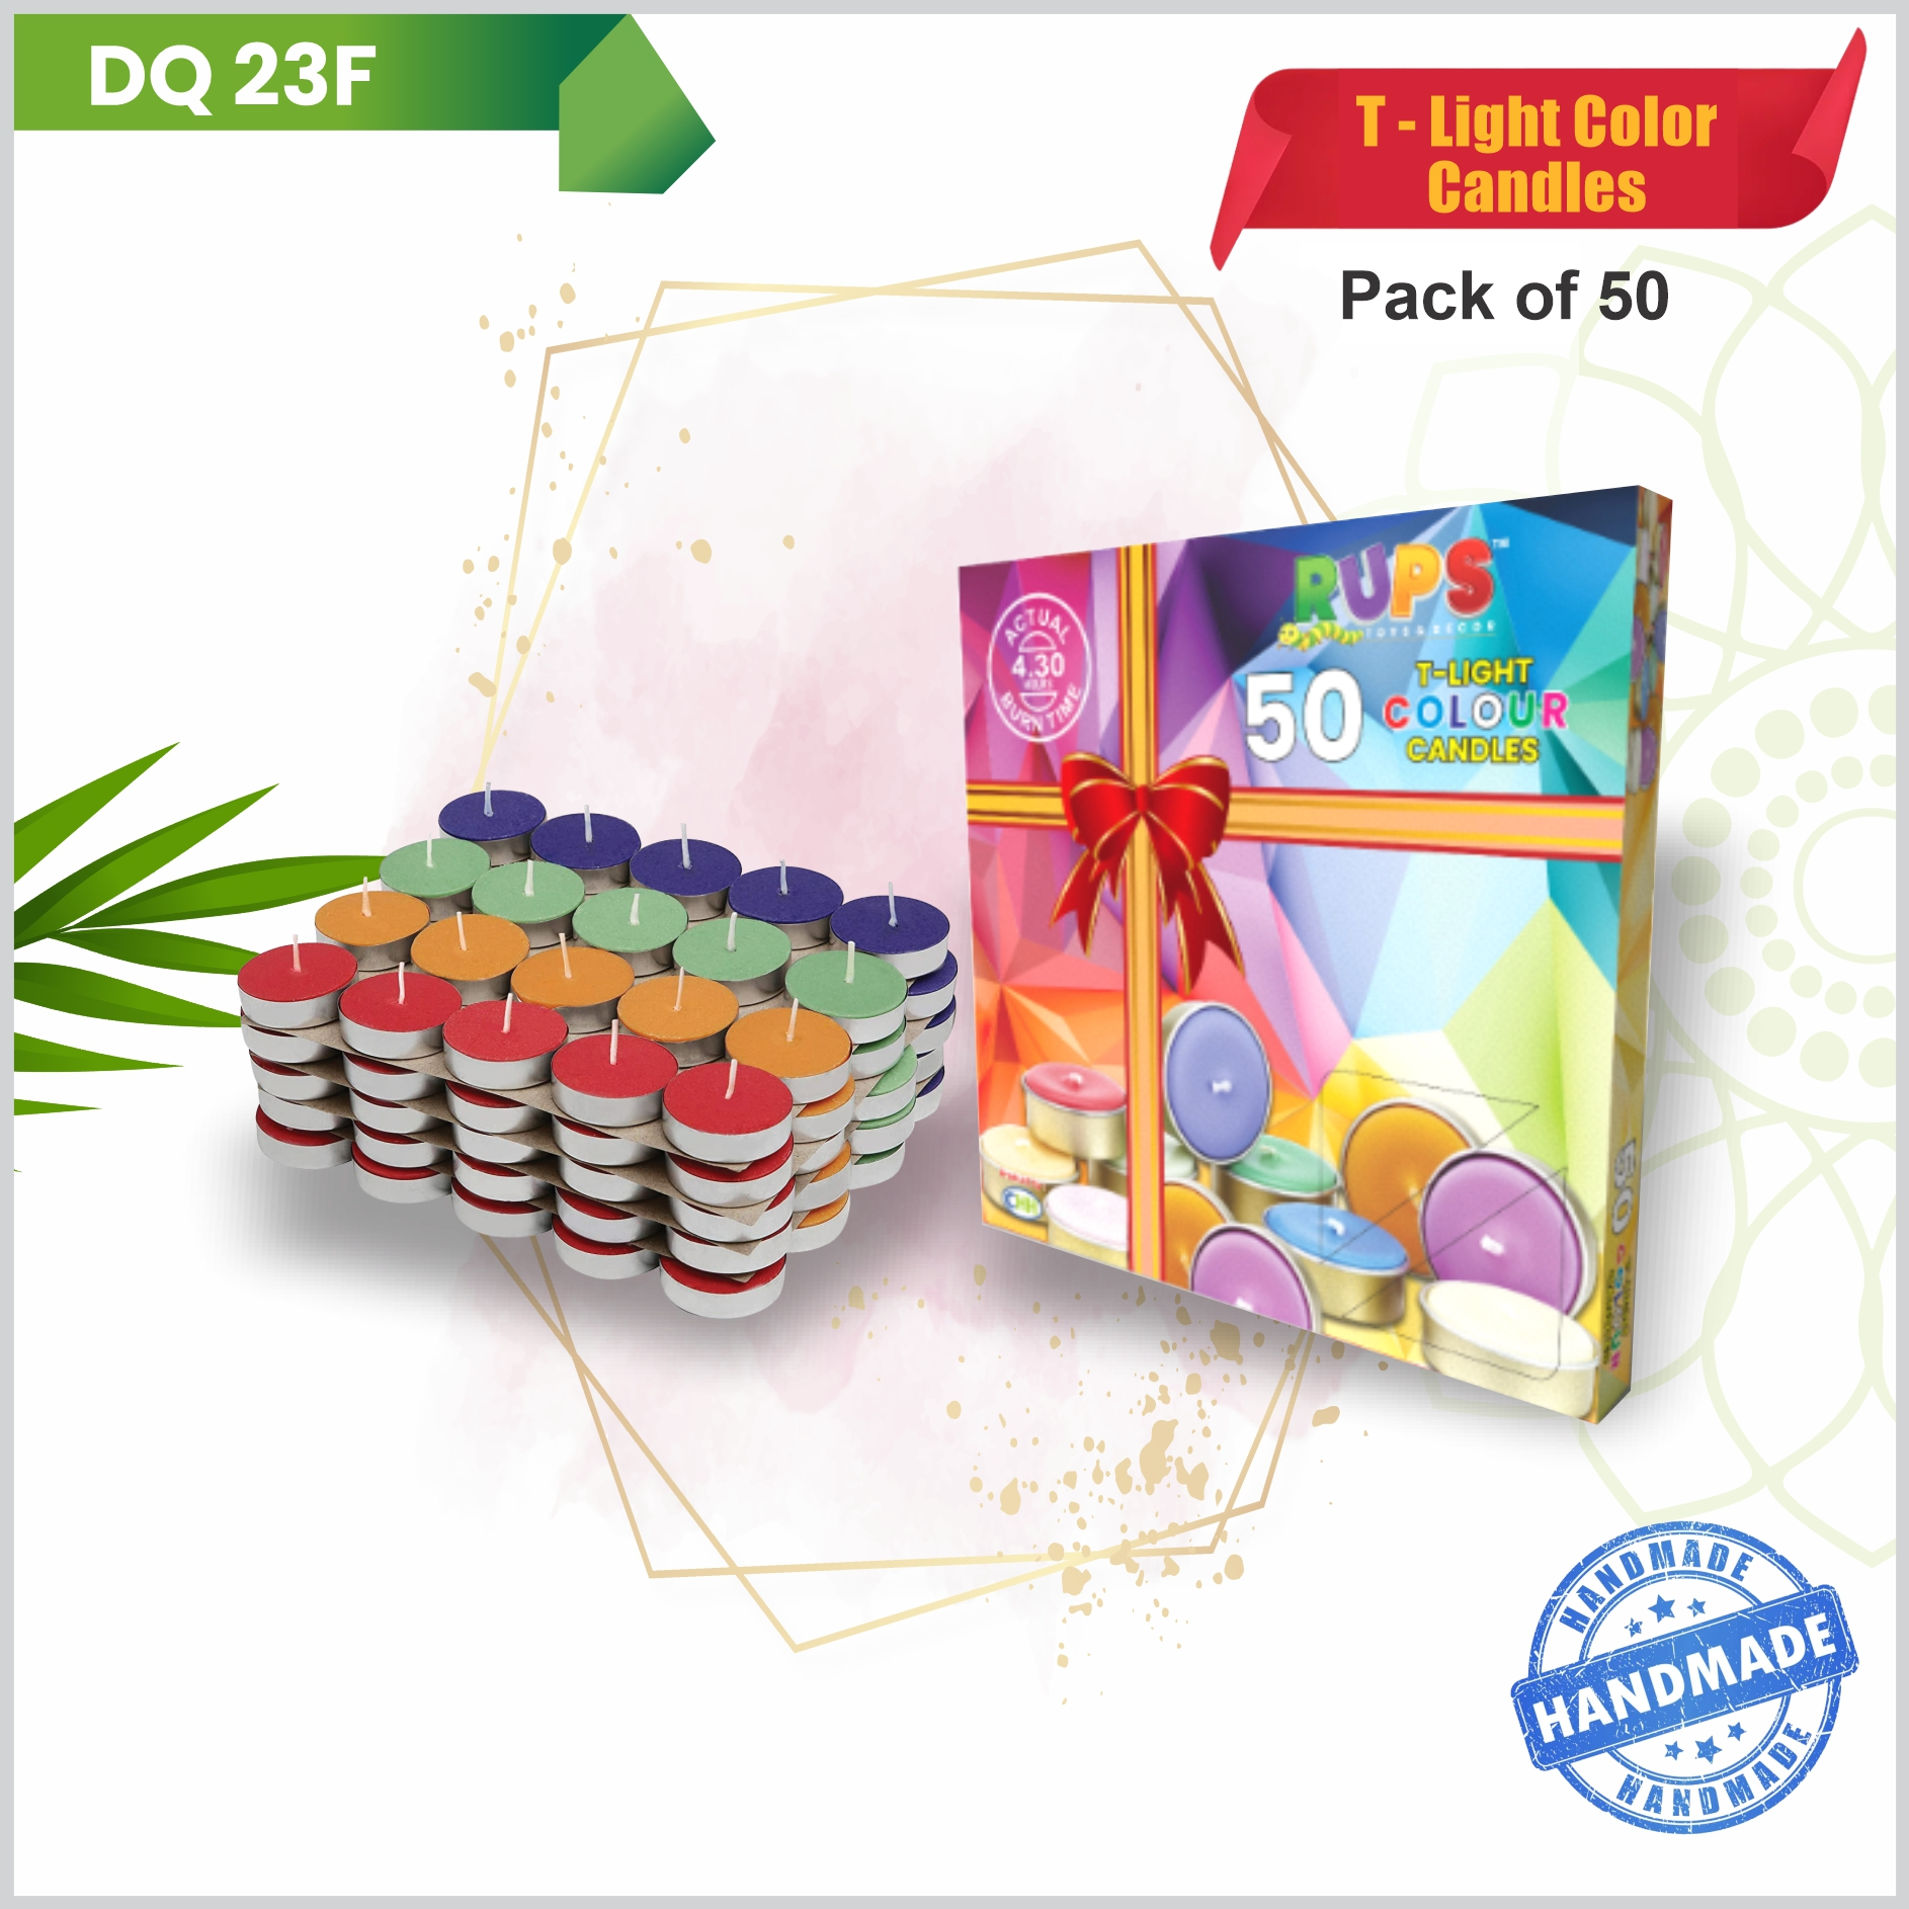 T-Light Color Candles Pack of 50|Festive Products|Diwali